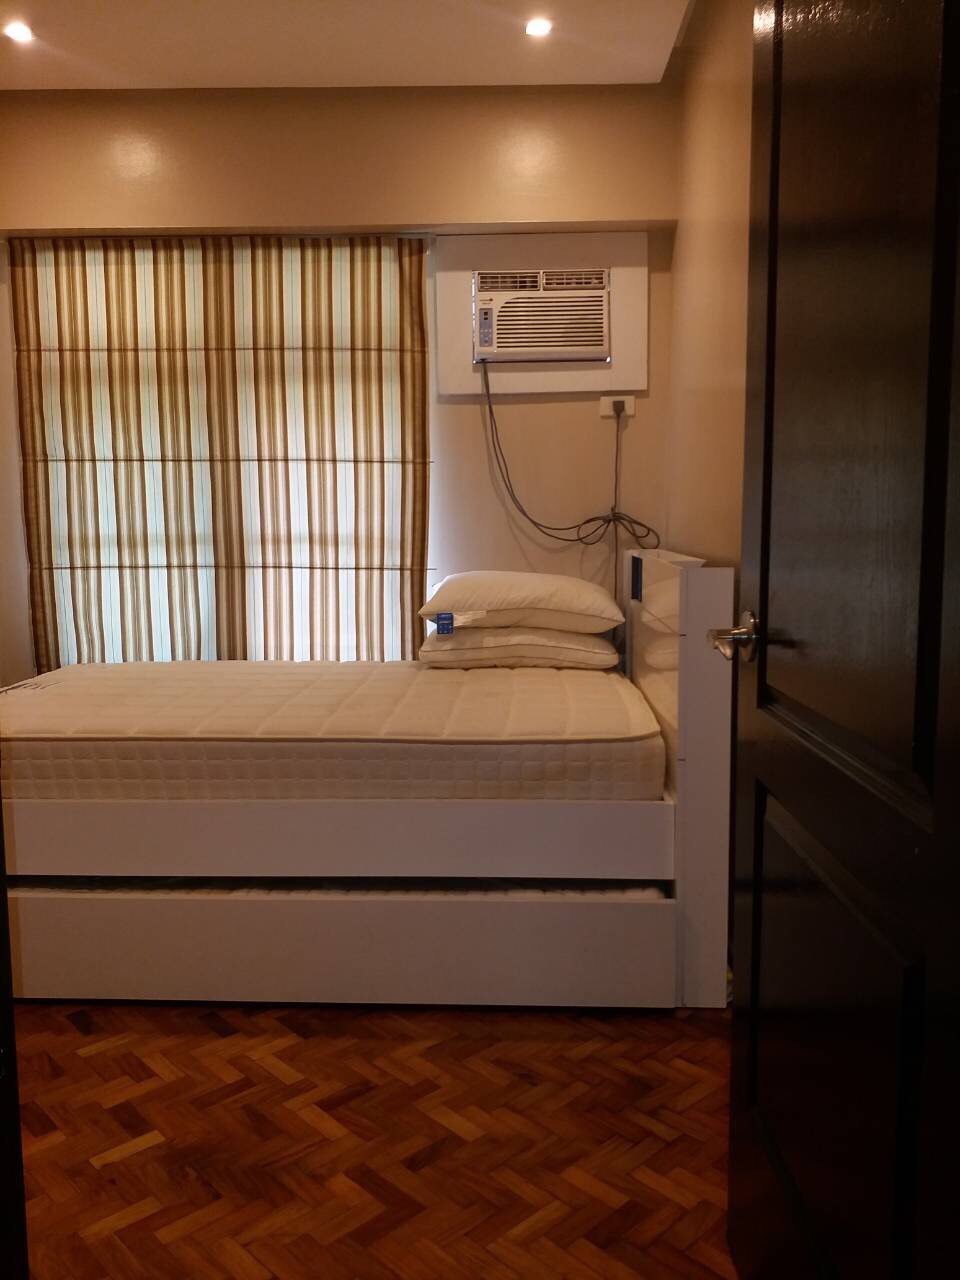 3 Bedrooms Condo For Rent, Almond, Two Serendra, BGC, Taguig City